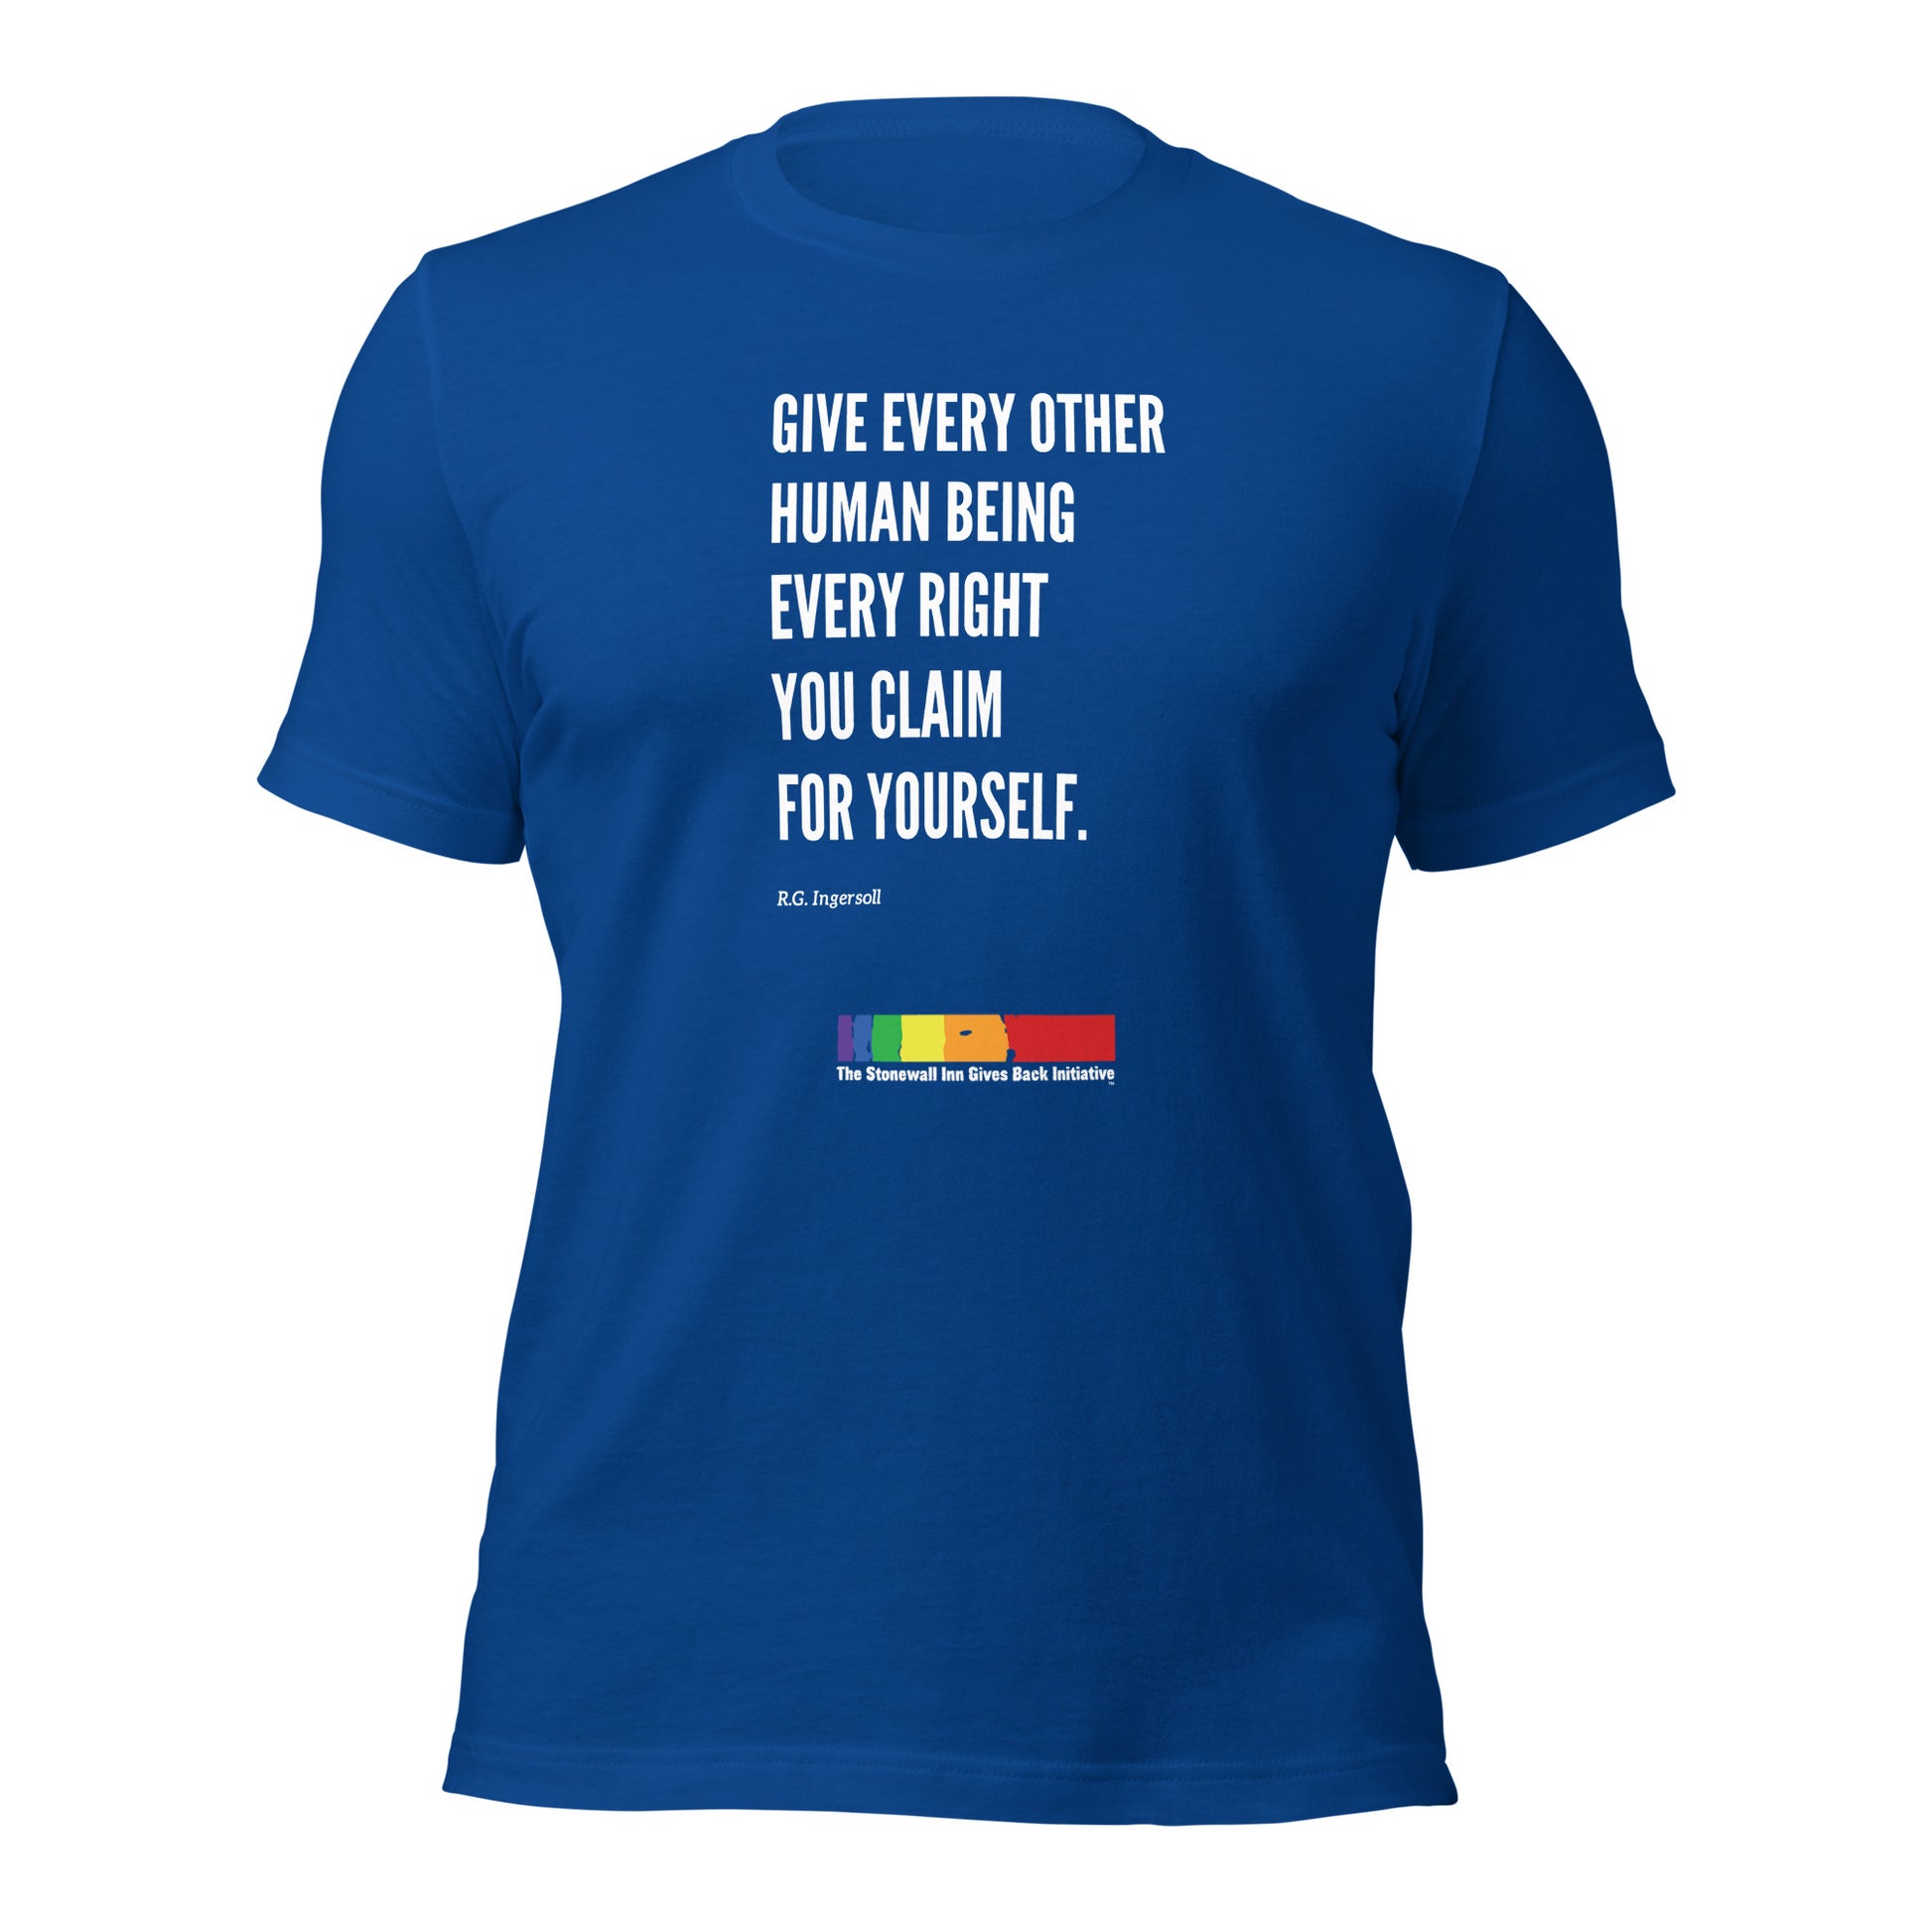 "Give Every Other Human Being Every Right You Claim For Yourself" LGBTQ+ Support short sleeve tee in Royal Blue